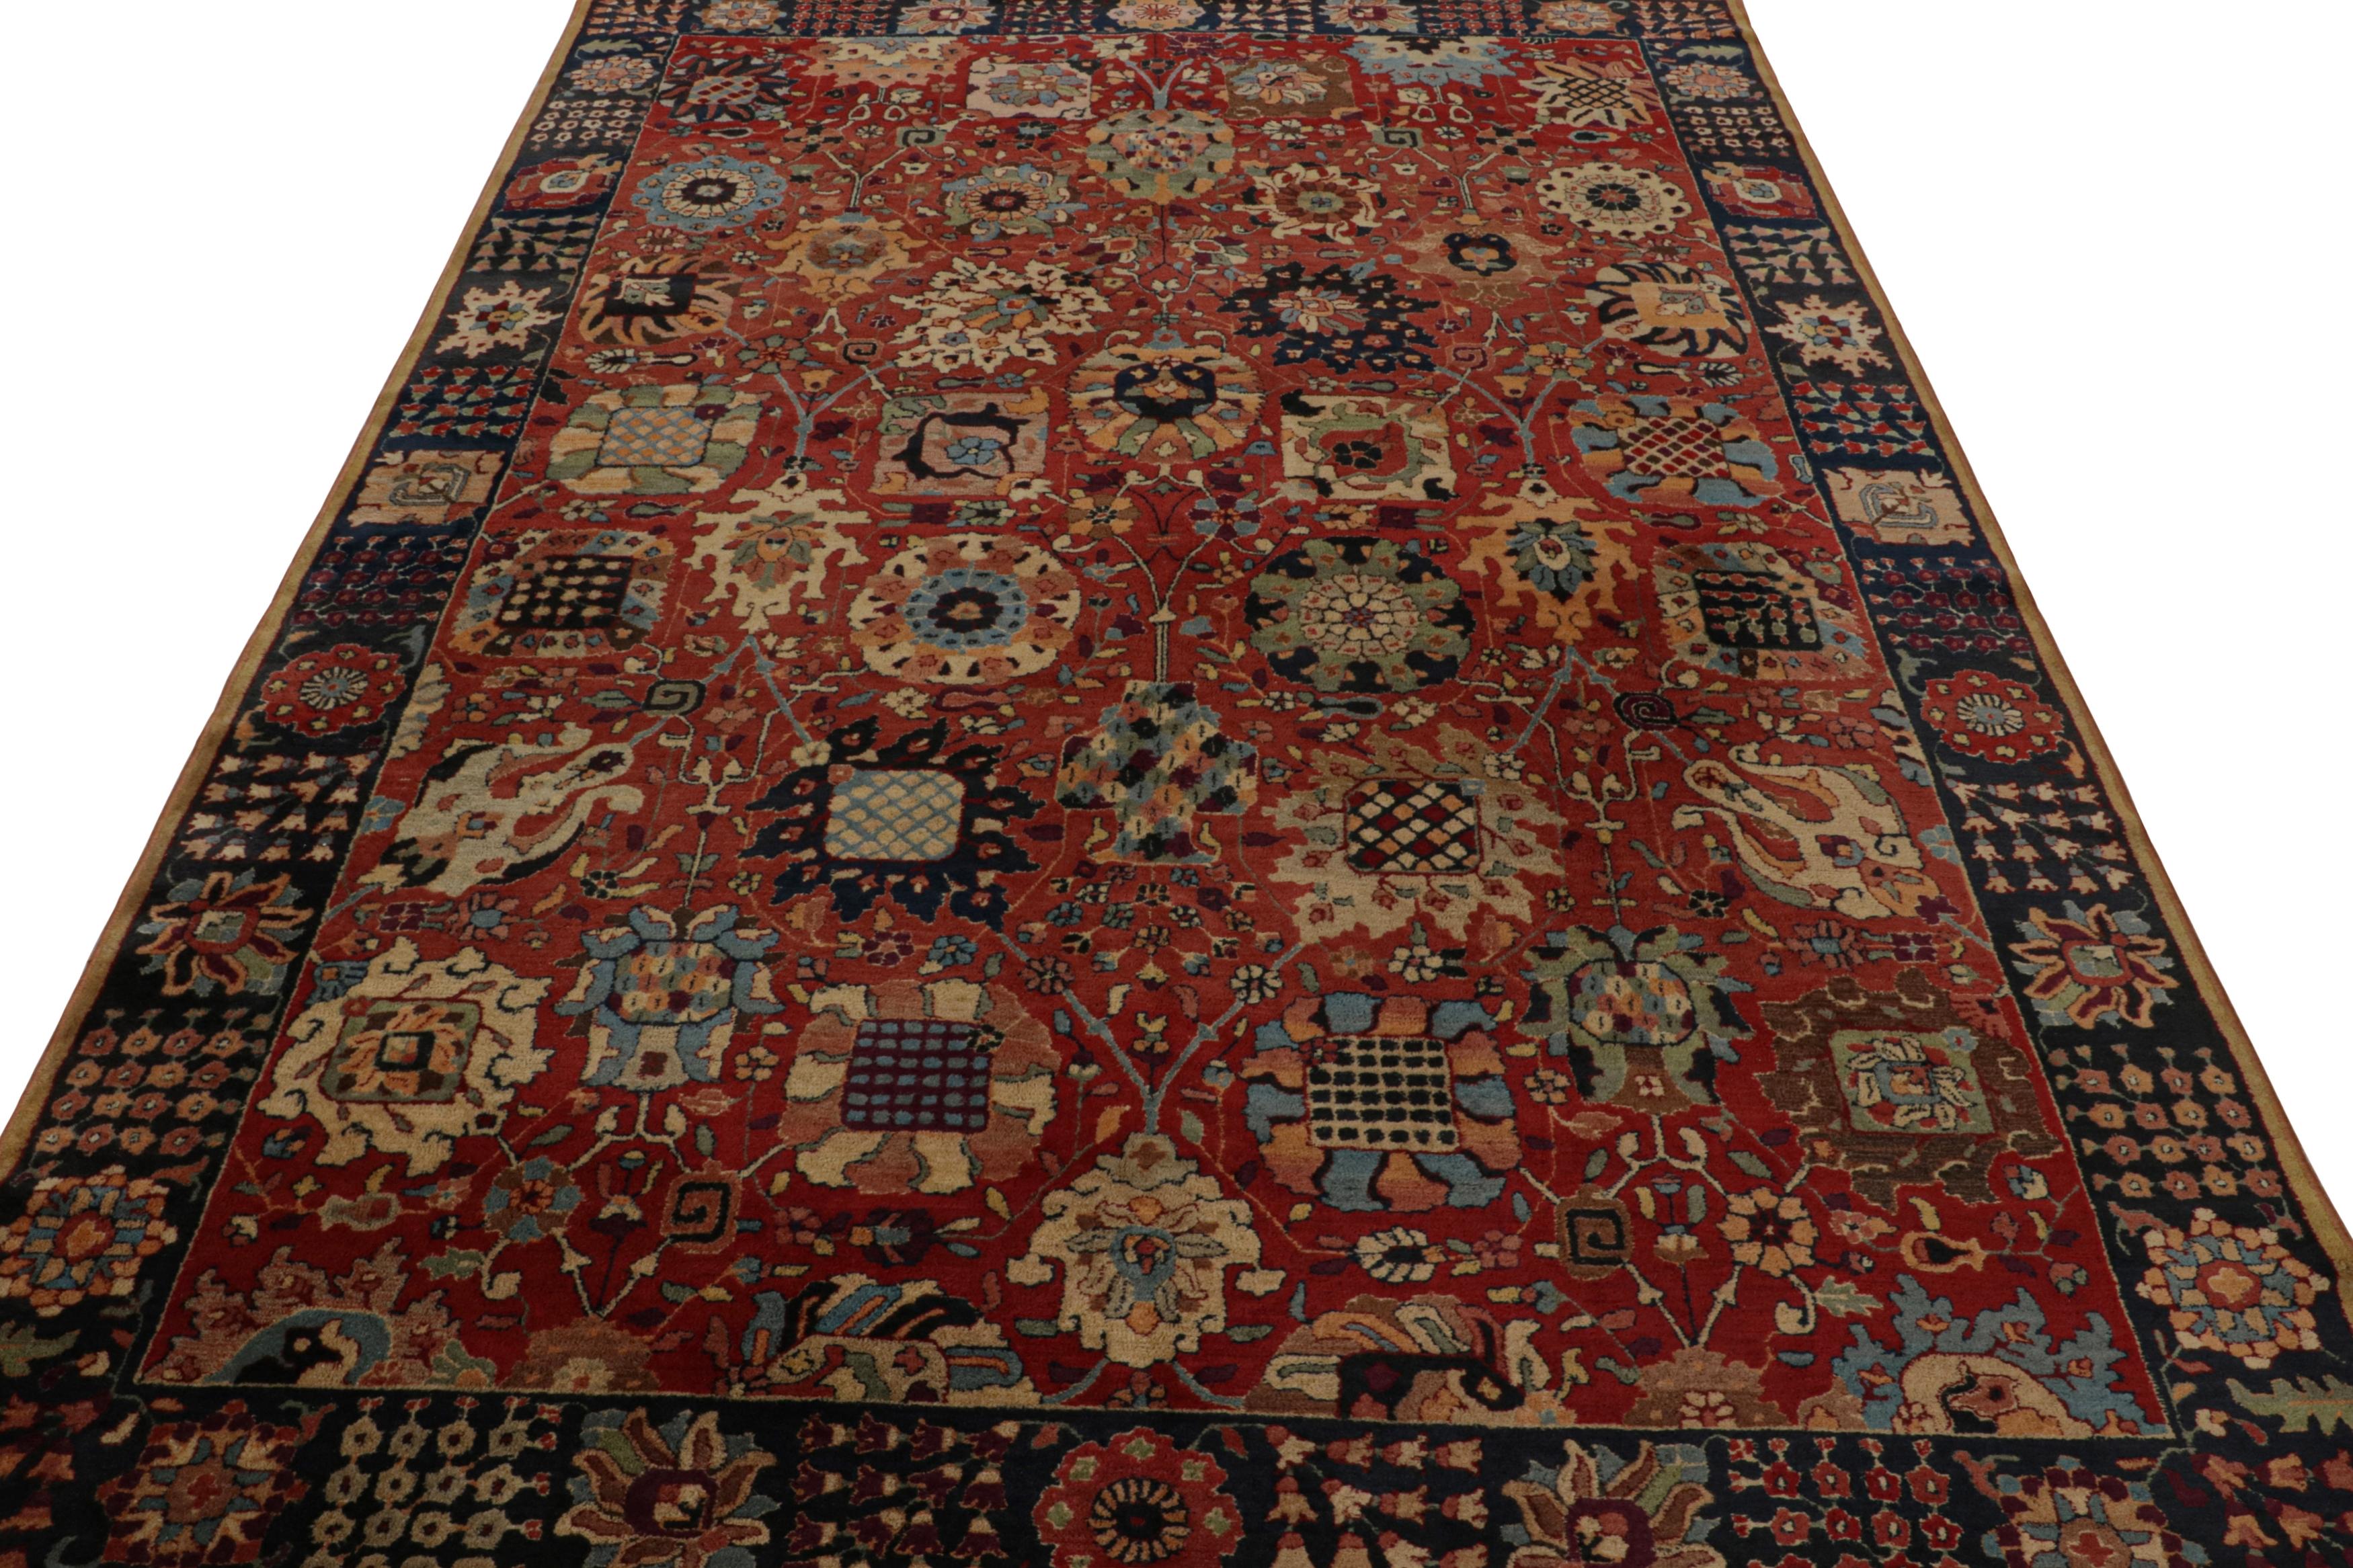 German Antique Handmade Hooked Rug in Red with Floral patterns, from Rug & Kilim For Sale